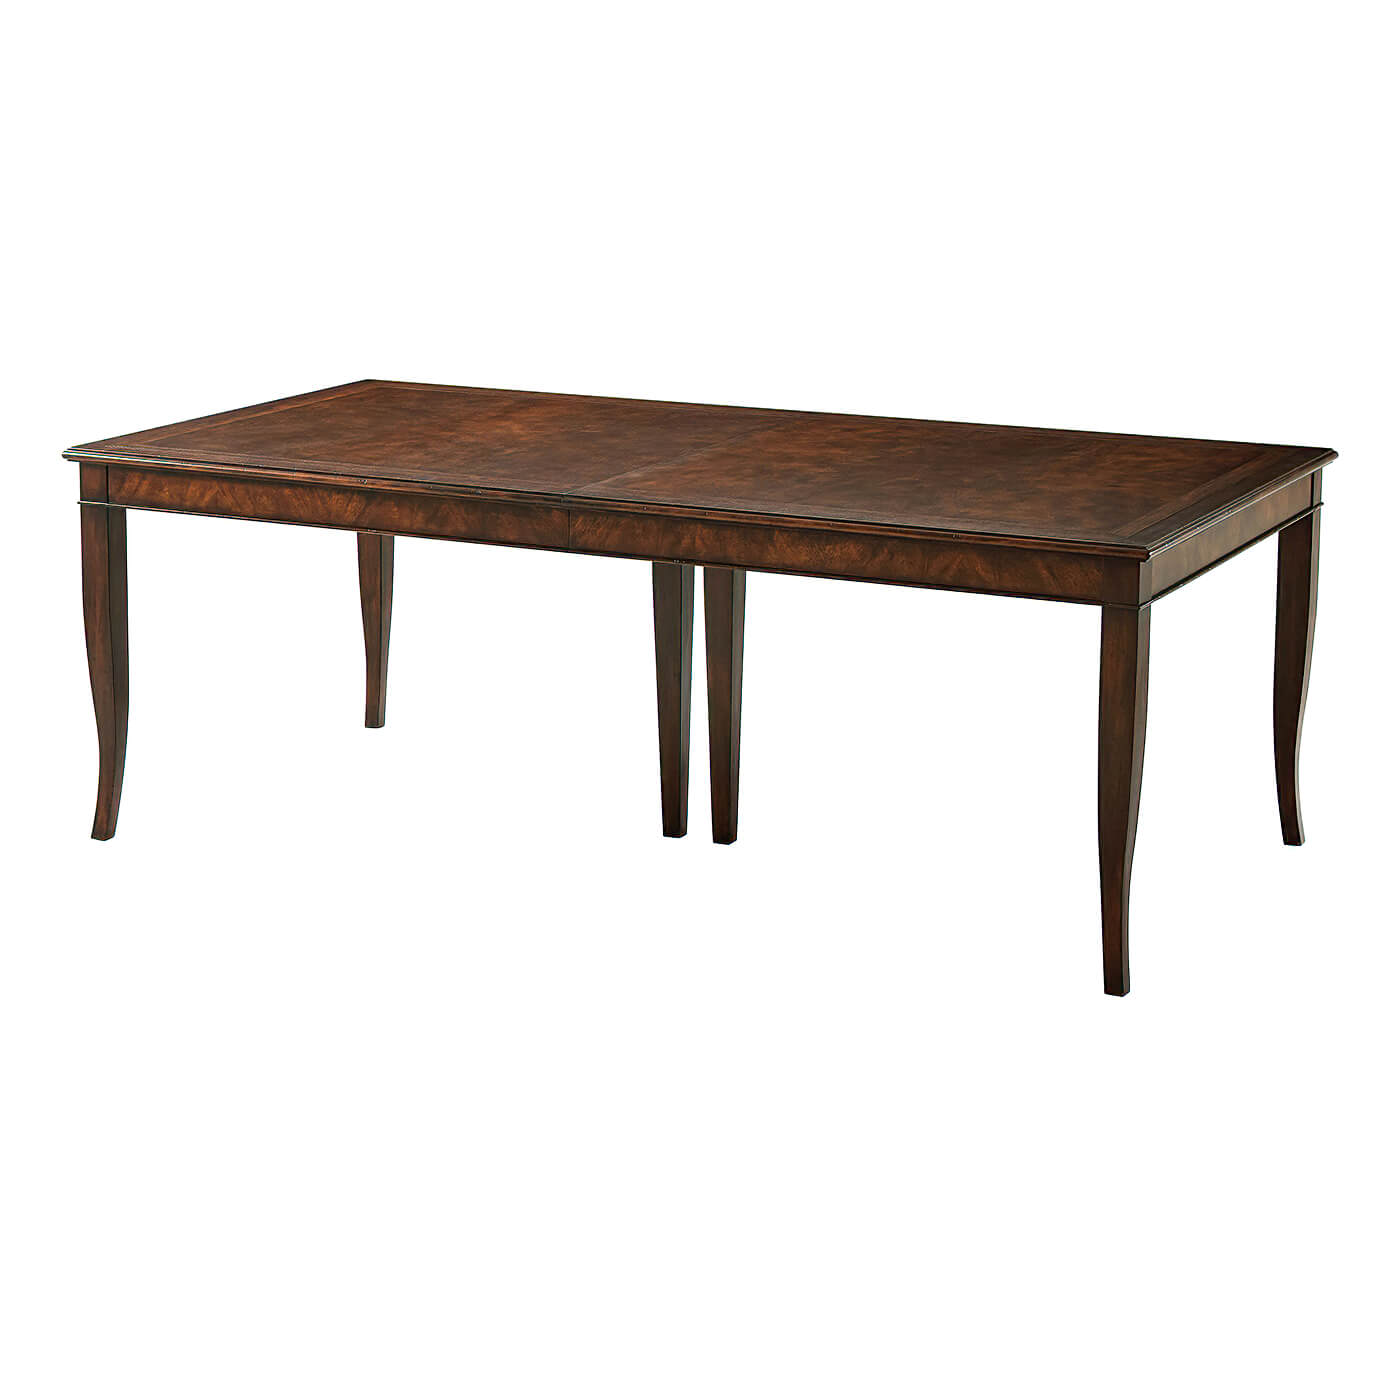 French Provincial Neo Classic Dining Table - English Georgian America